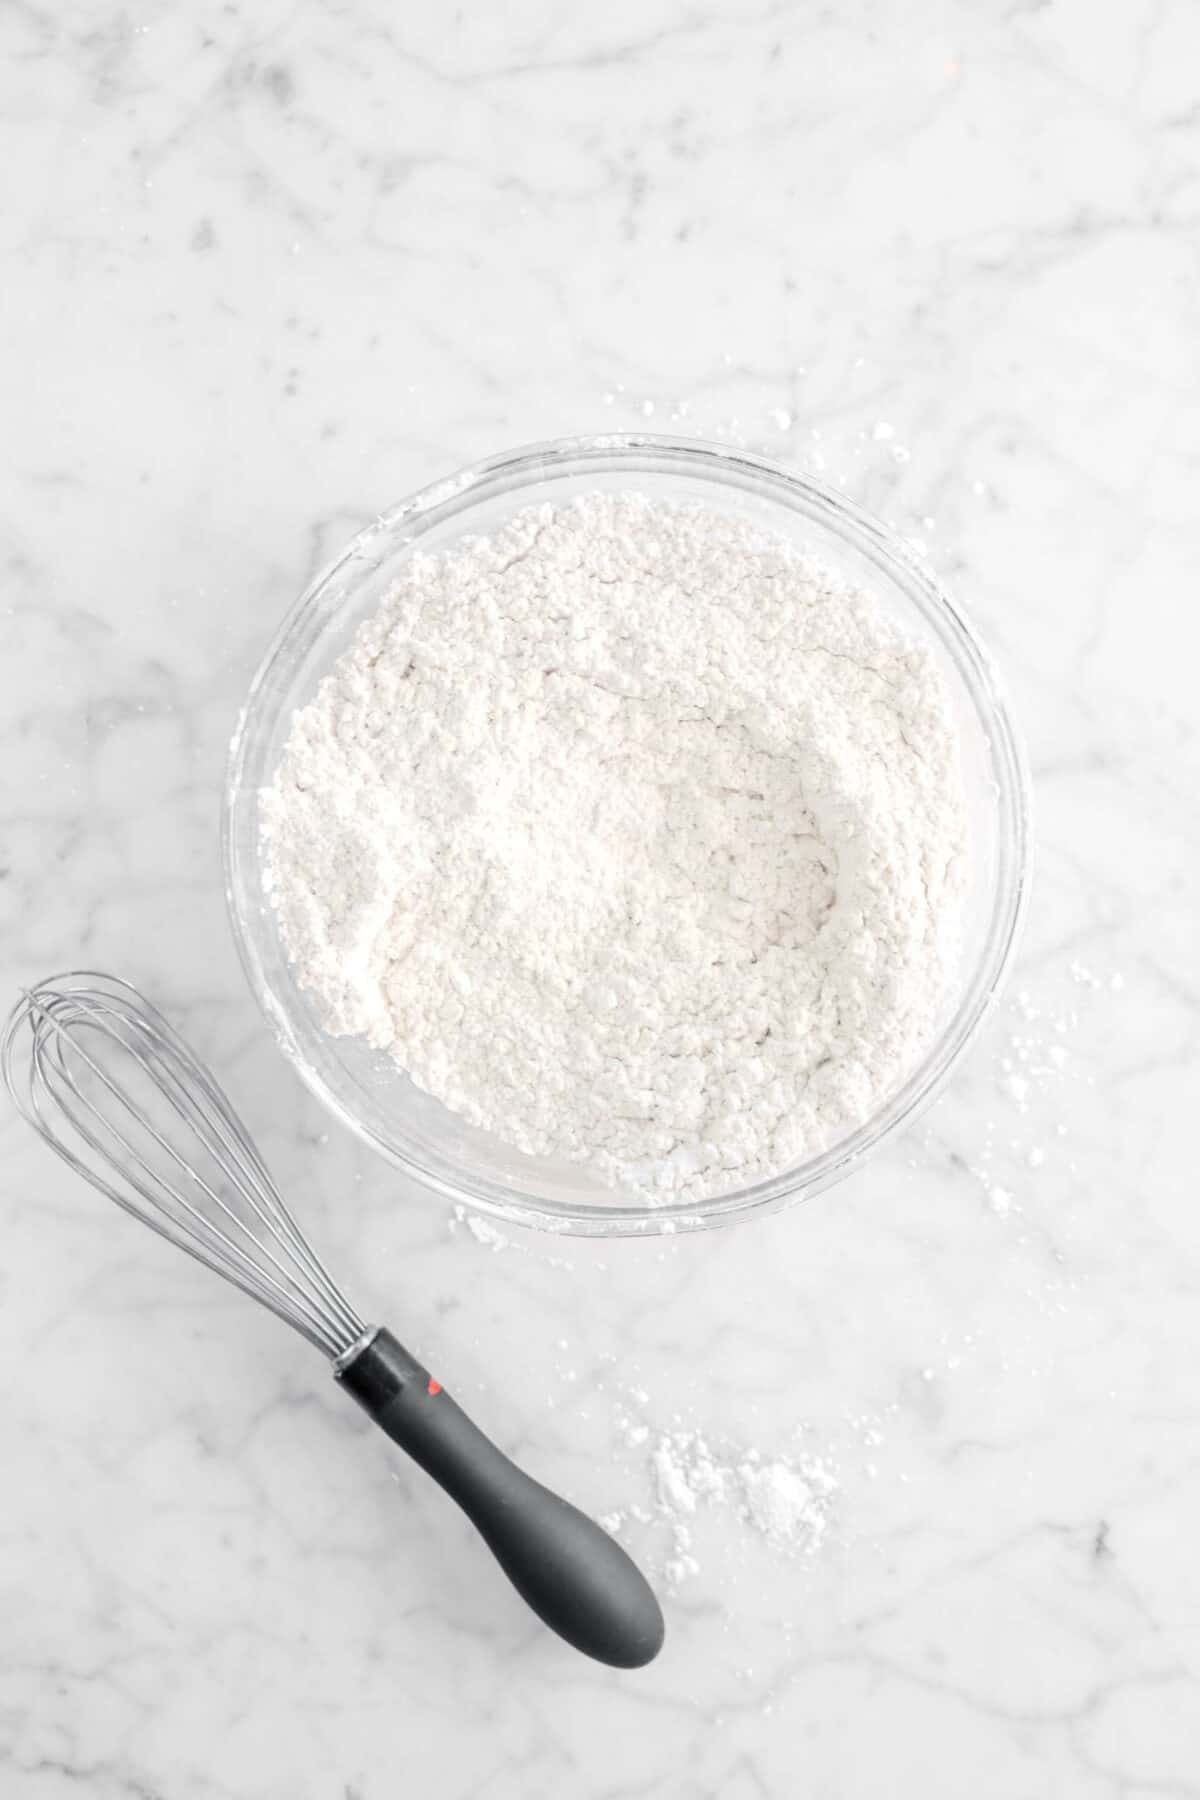 powdered sugar and spice whisked together in glass bowl with whisk next to it